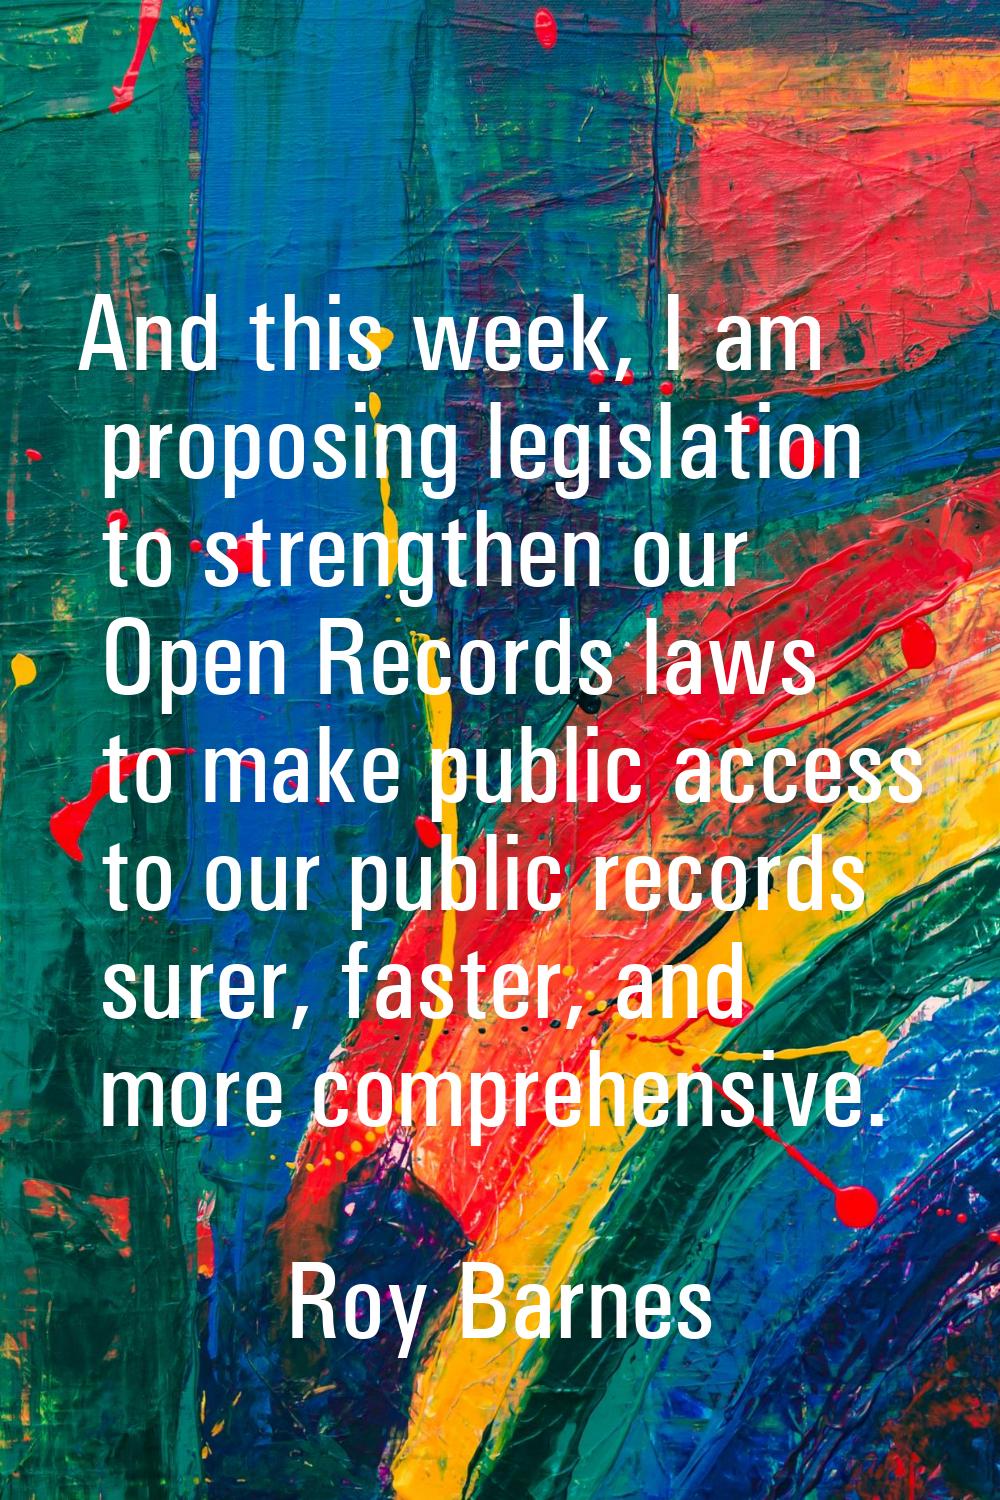 And this week, I am proposing legislation to strengthen our Open Records laws to make public access